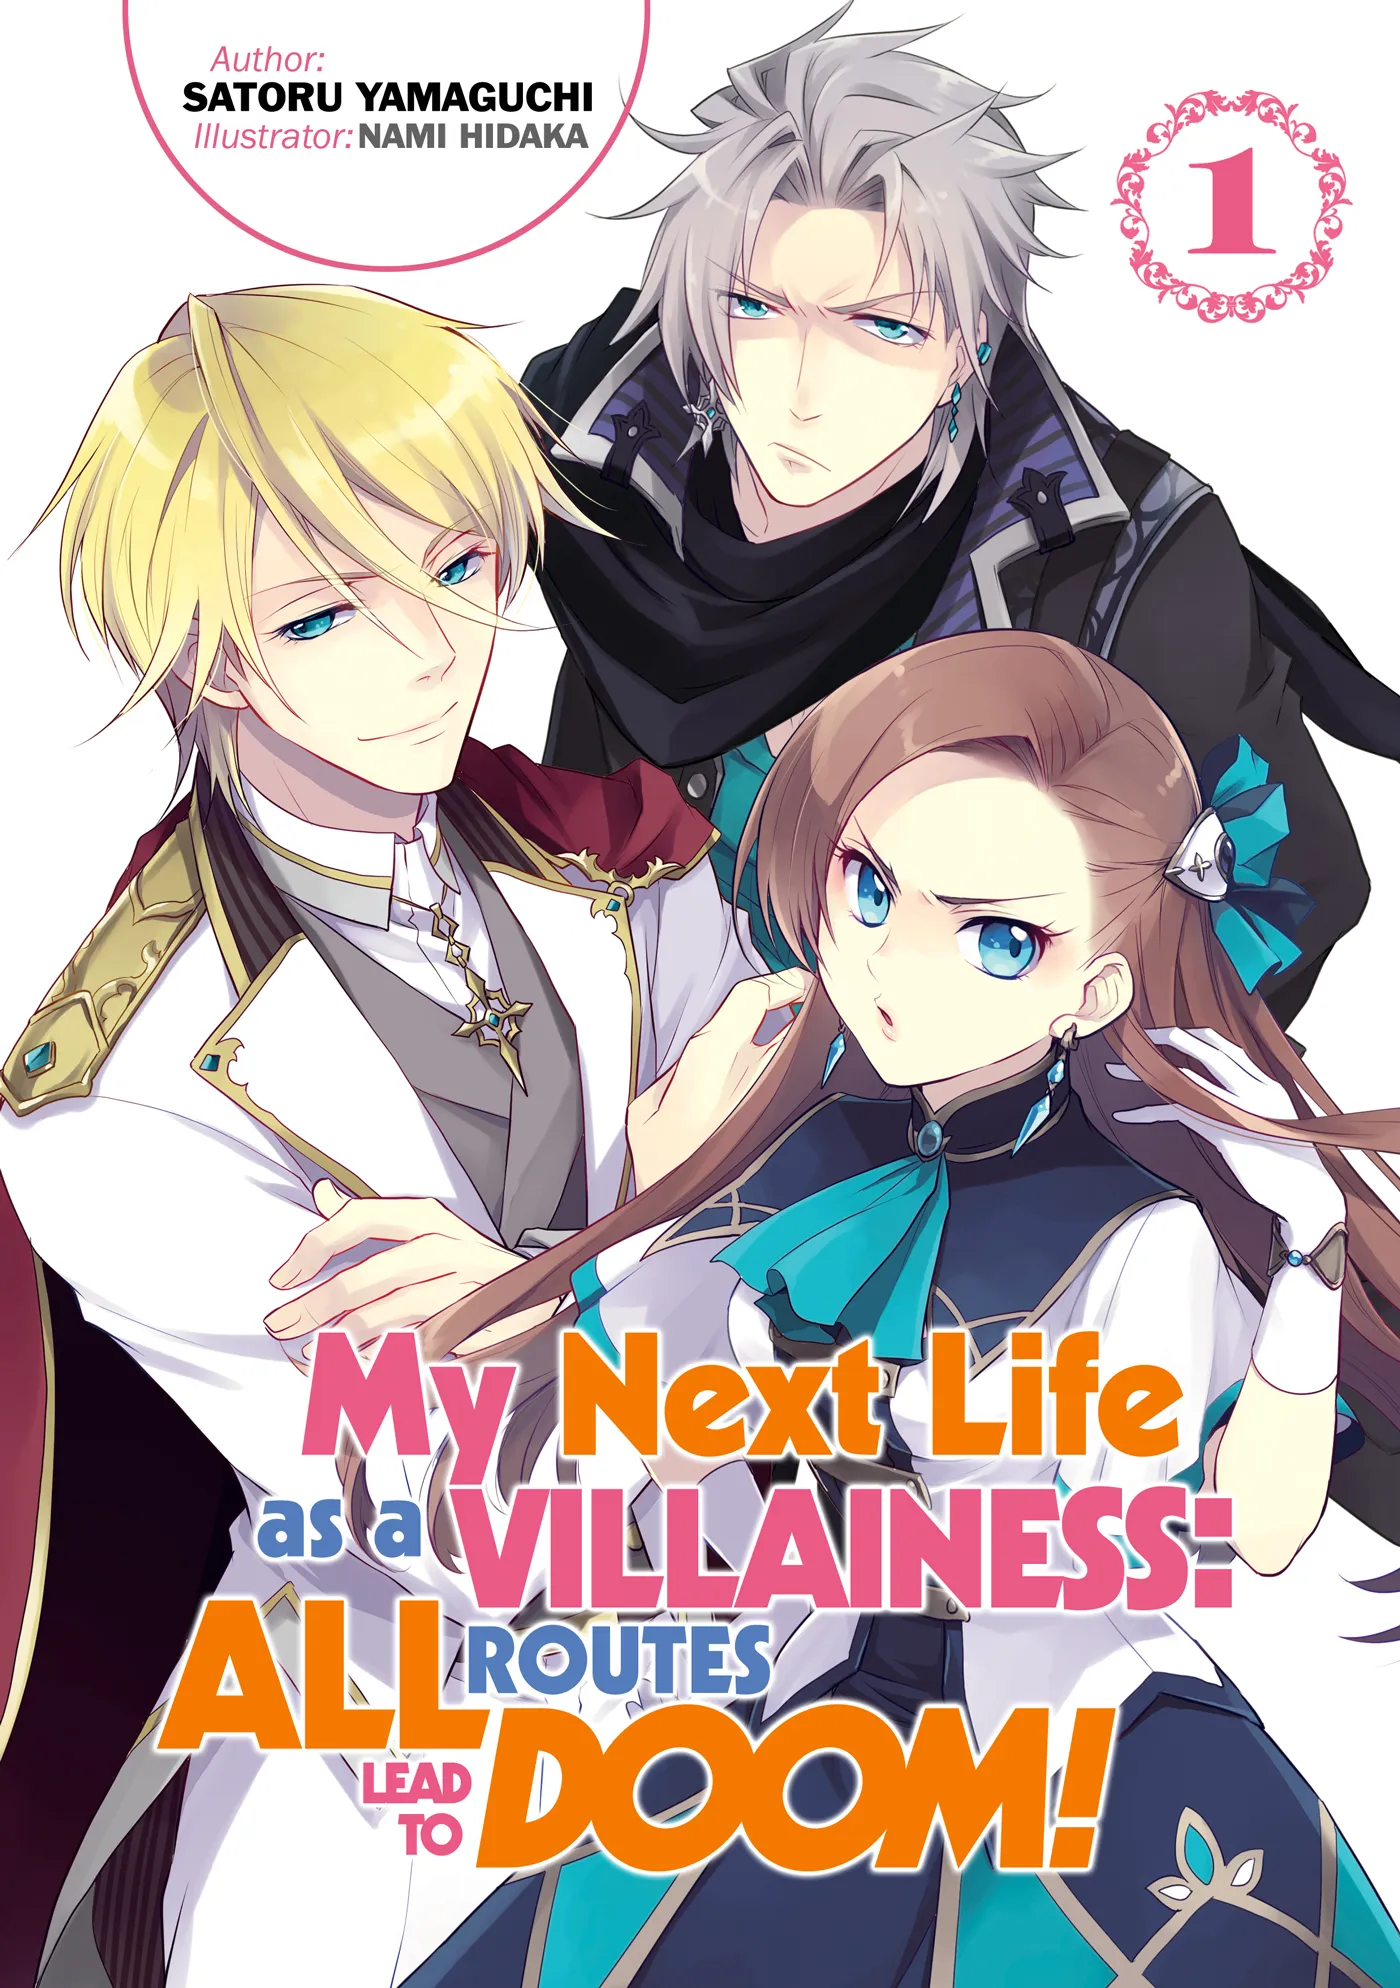 My Next Life as a Villainess: All Routes Lead to Doom! Volume 1 (My Next Life as a Villainess: All Routes Lead to Doom! #1)